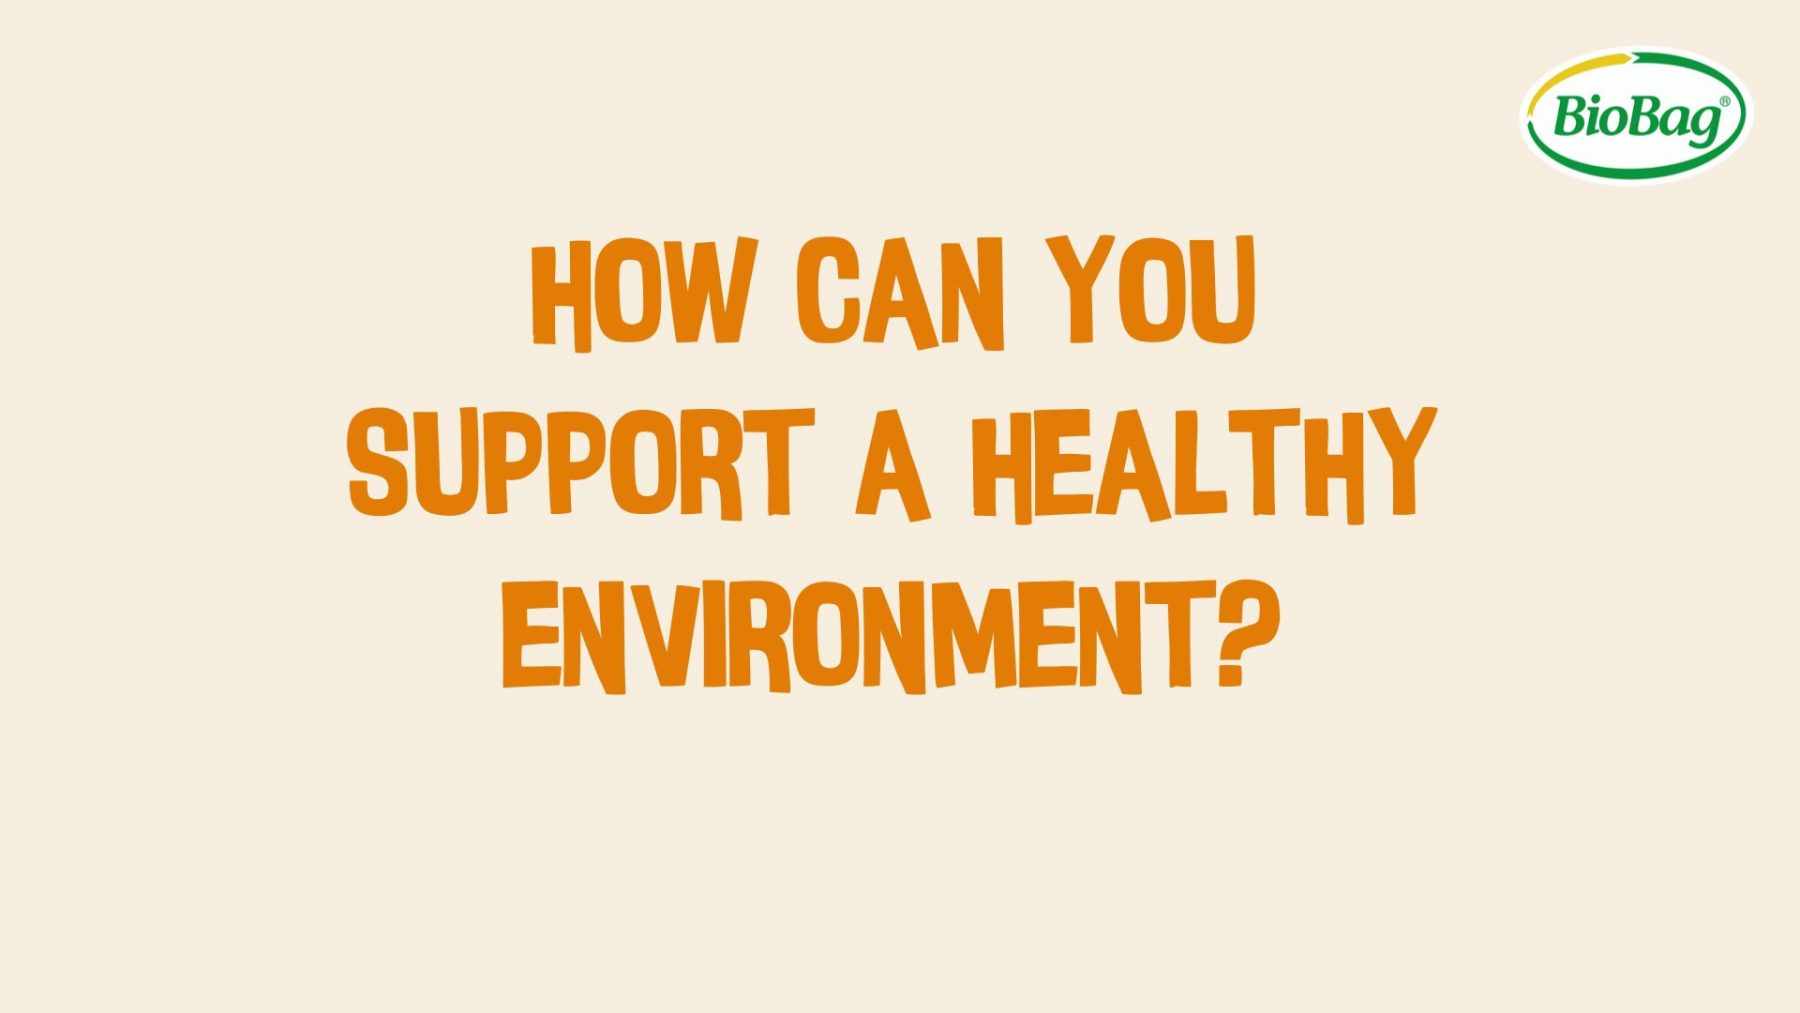 How can you support a healthy environment